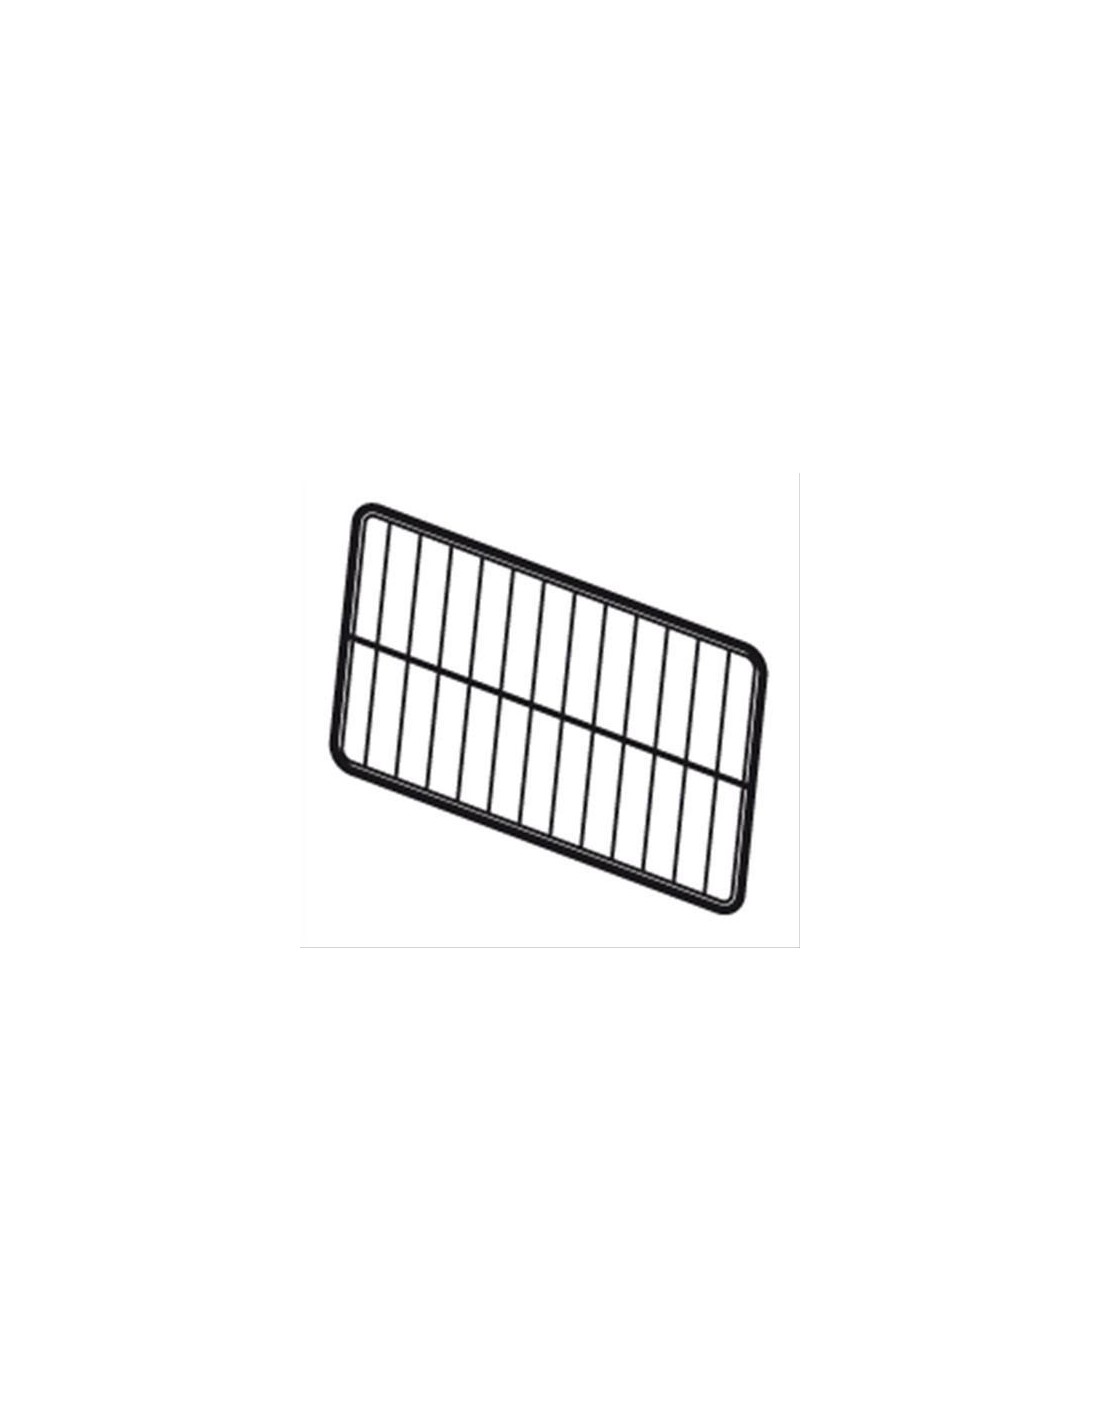 Internal grill for oven 88.5 x 45 cm - For FM model